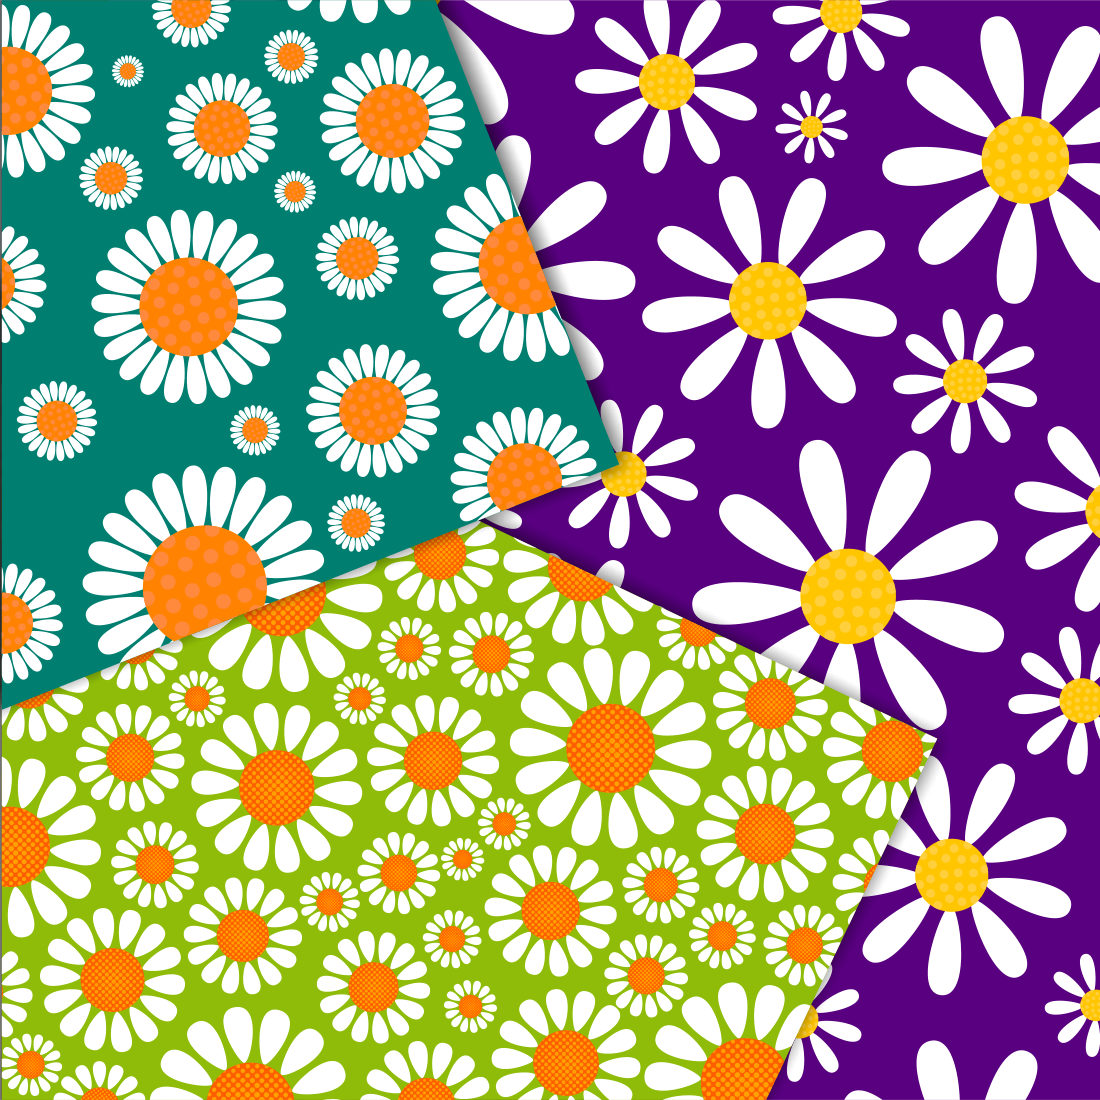 Summer Floral Country Patterns cover image.